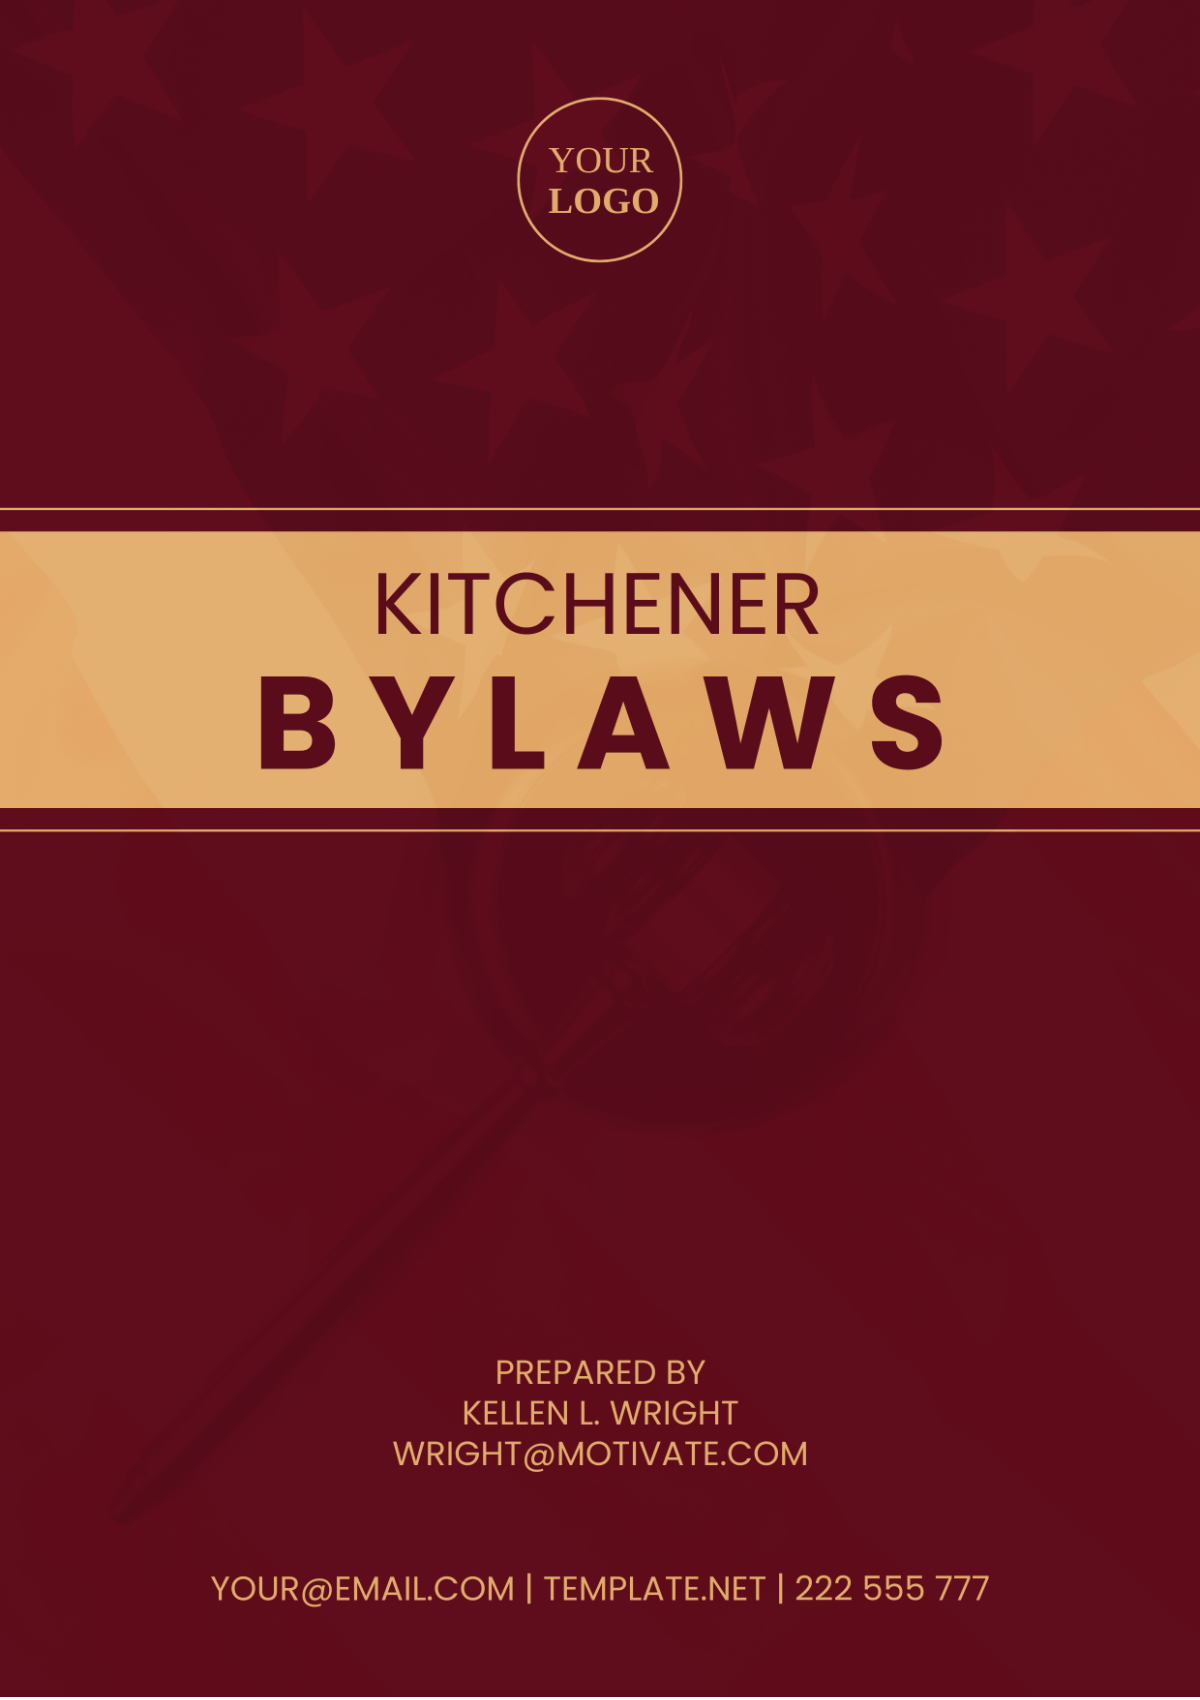 Kitchener Bylaws Template